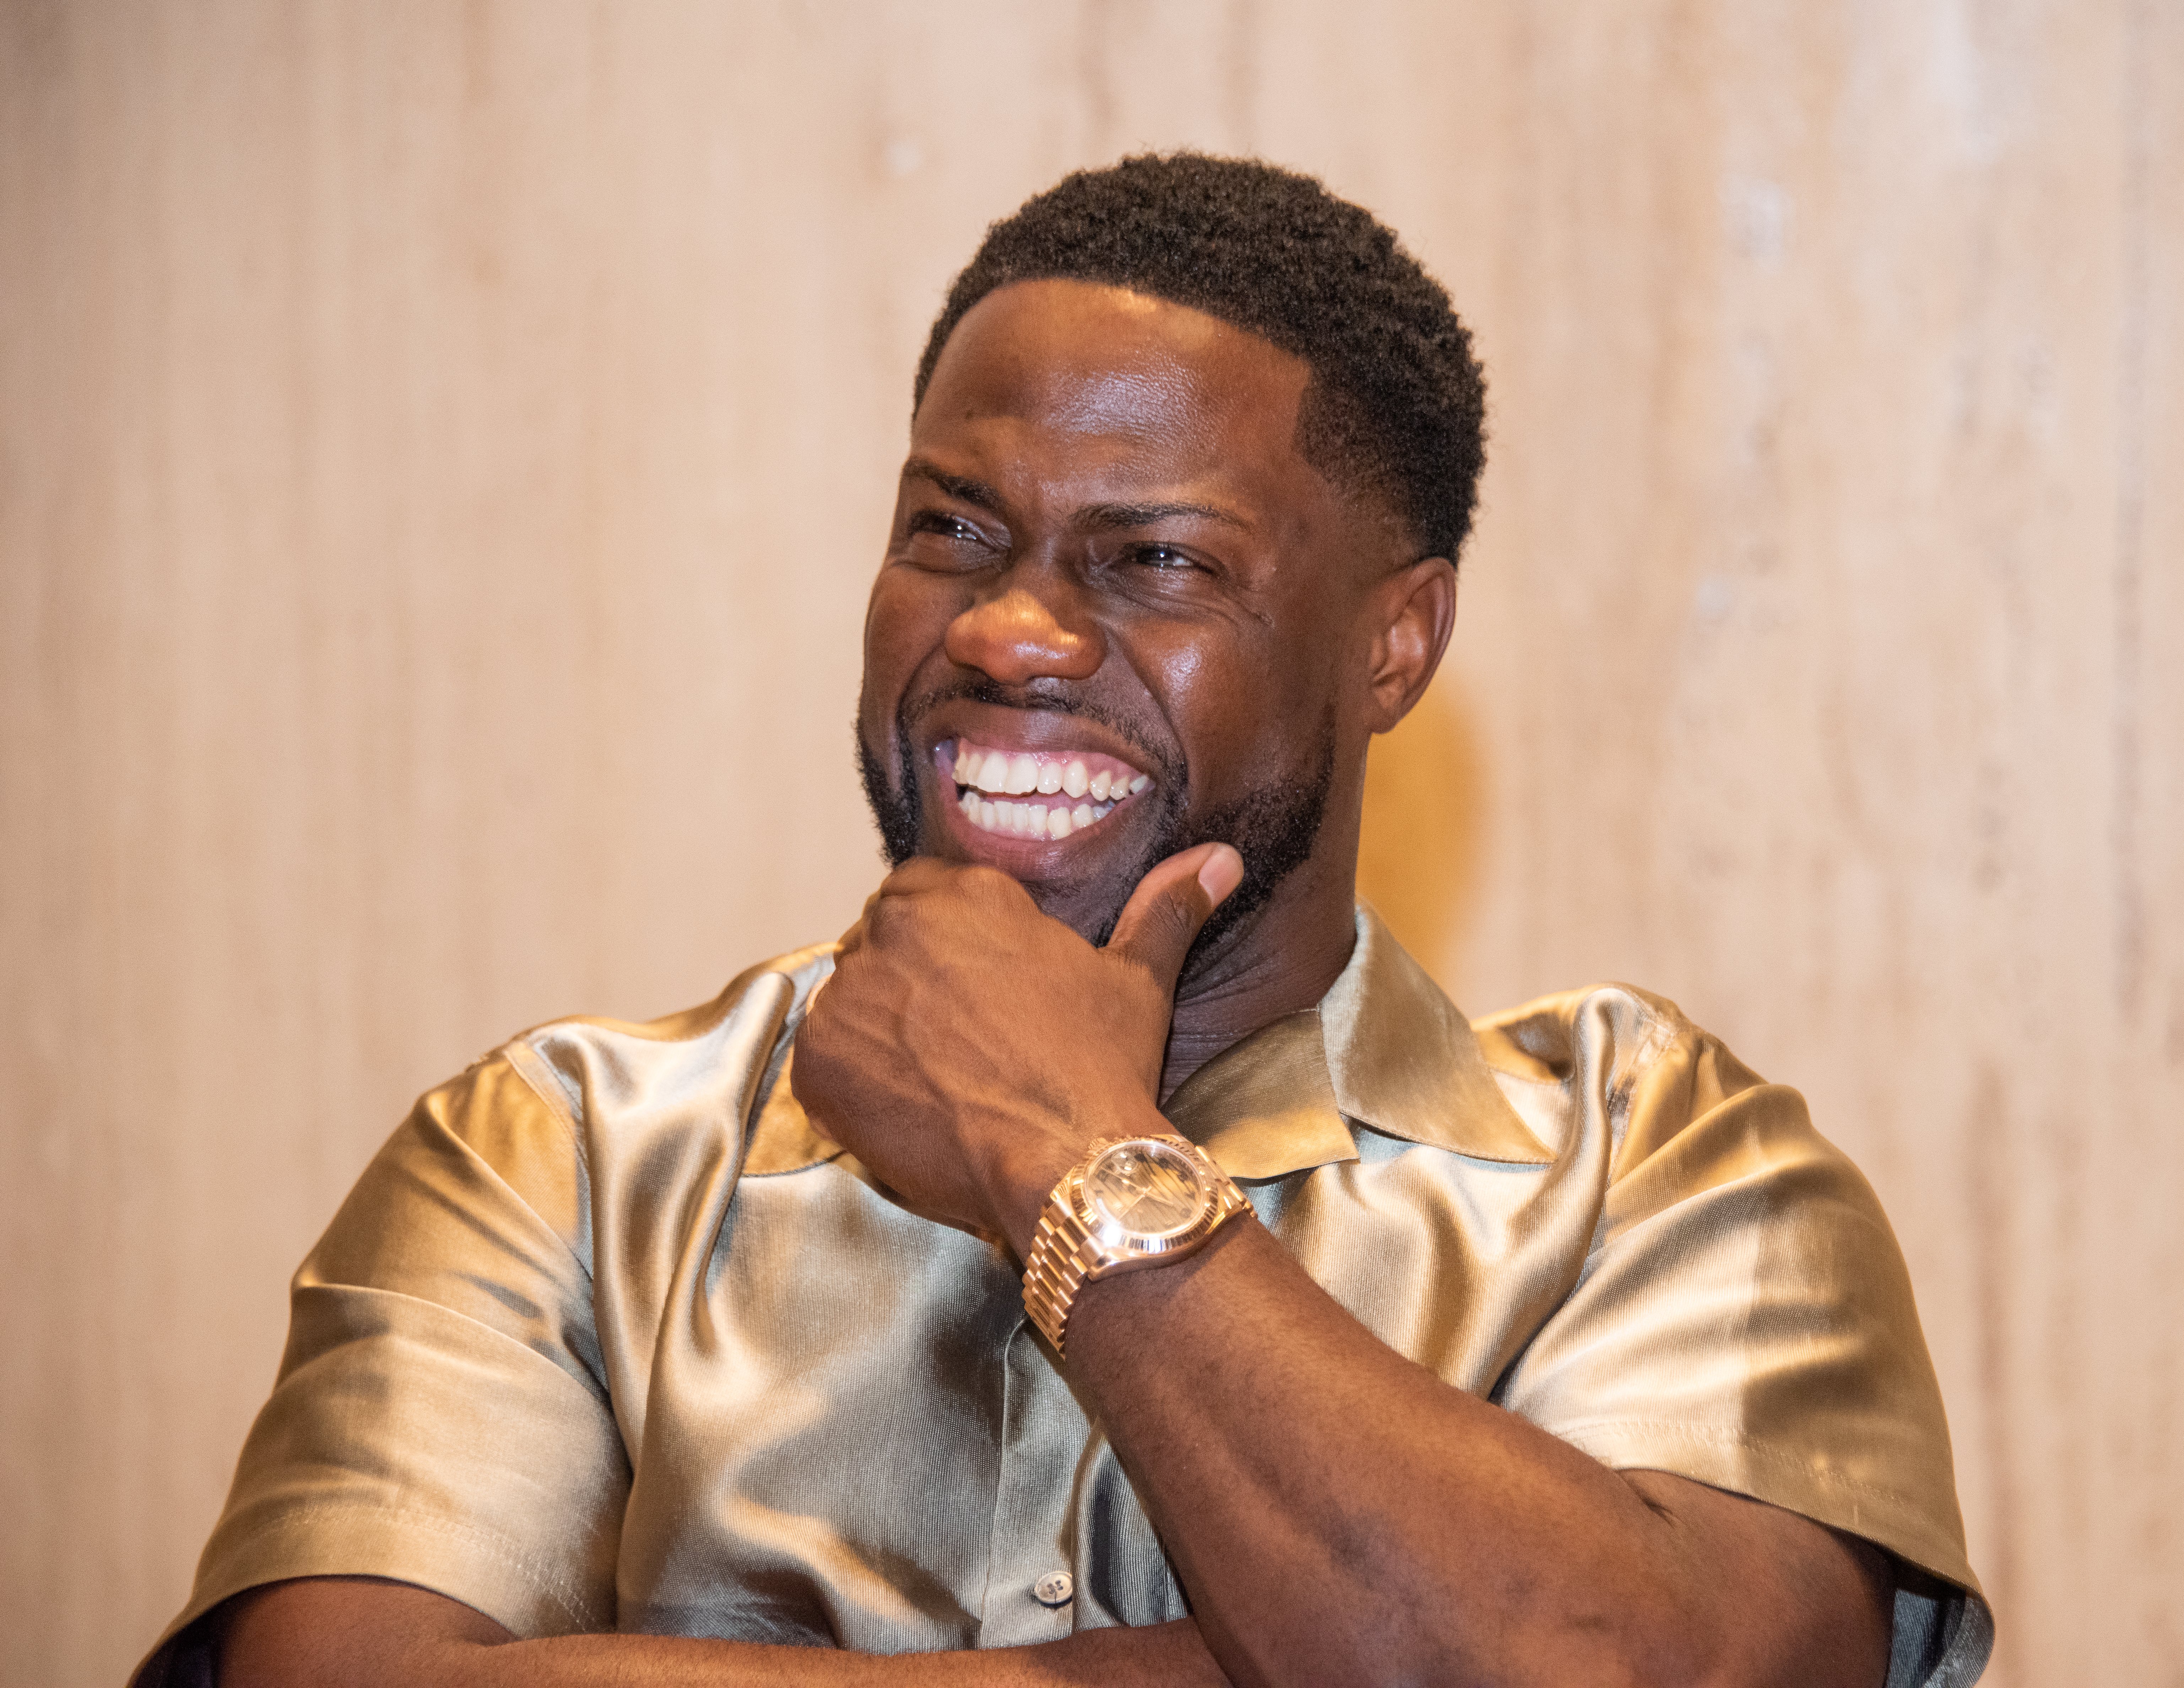 Kevin Hart at the "Jumanji: Next Level" press conference in Cabo San Lucas on November 23, 2019. | Photo: Getty Images